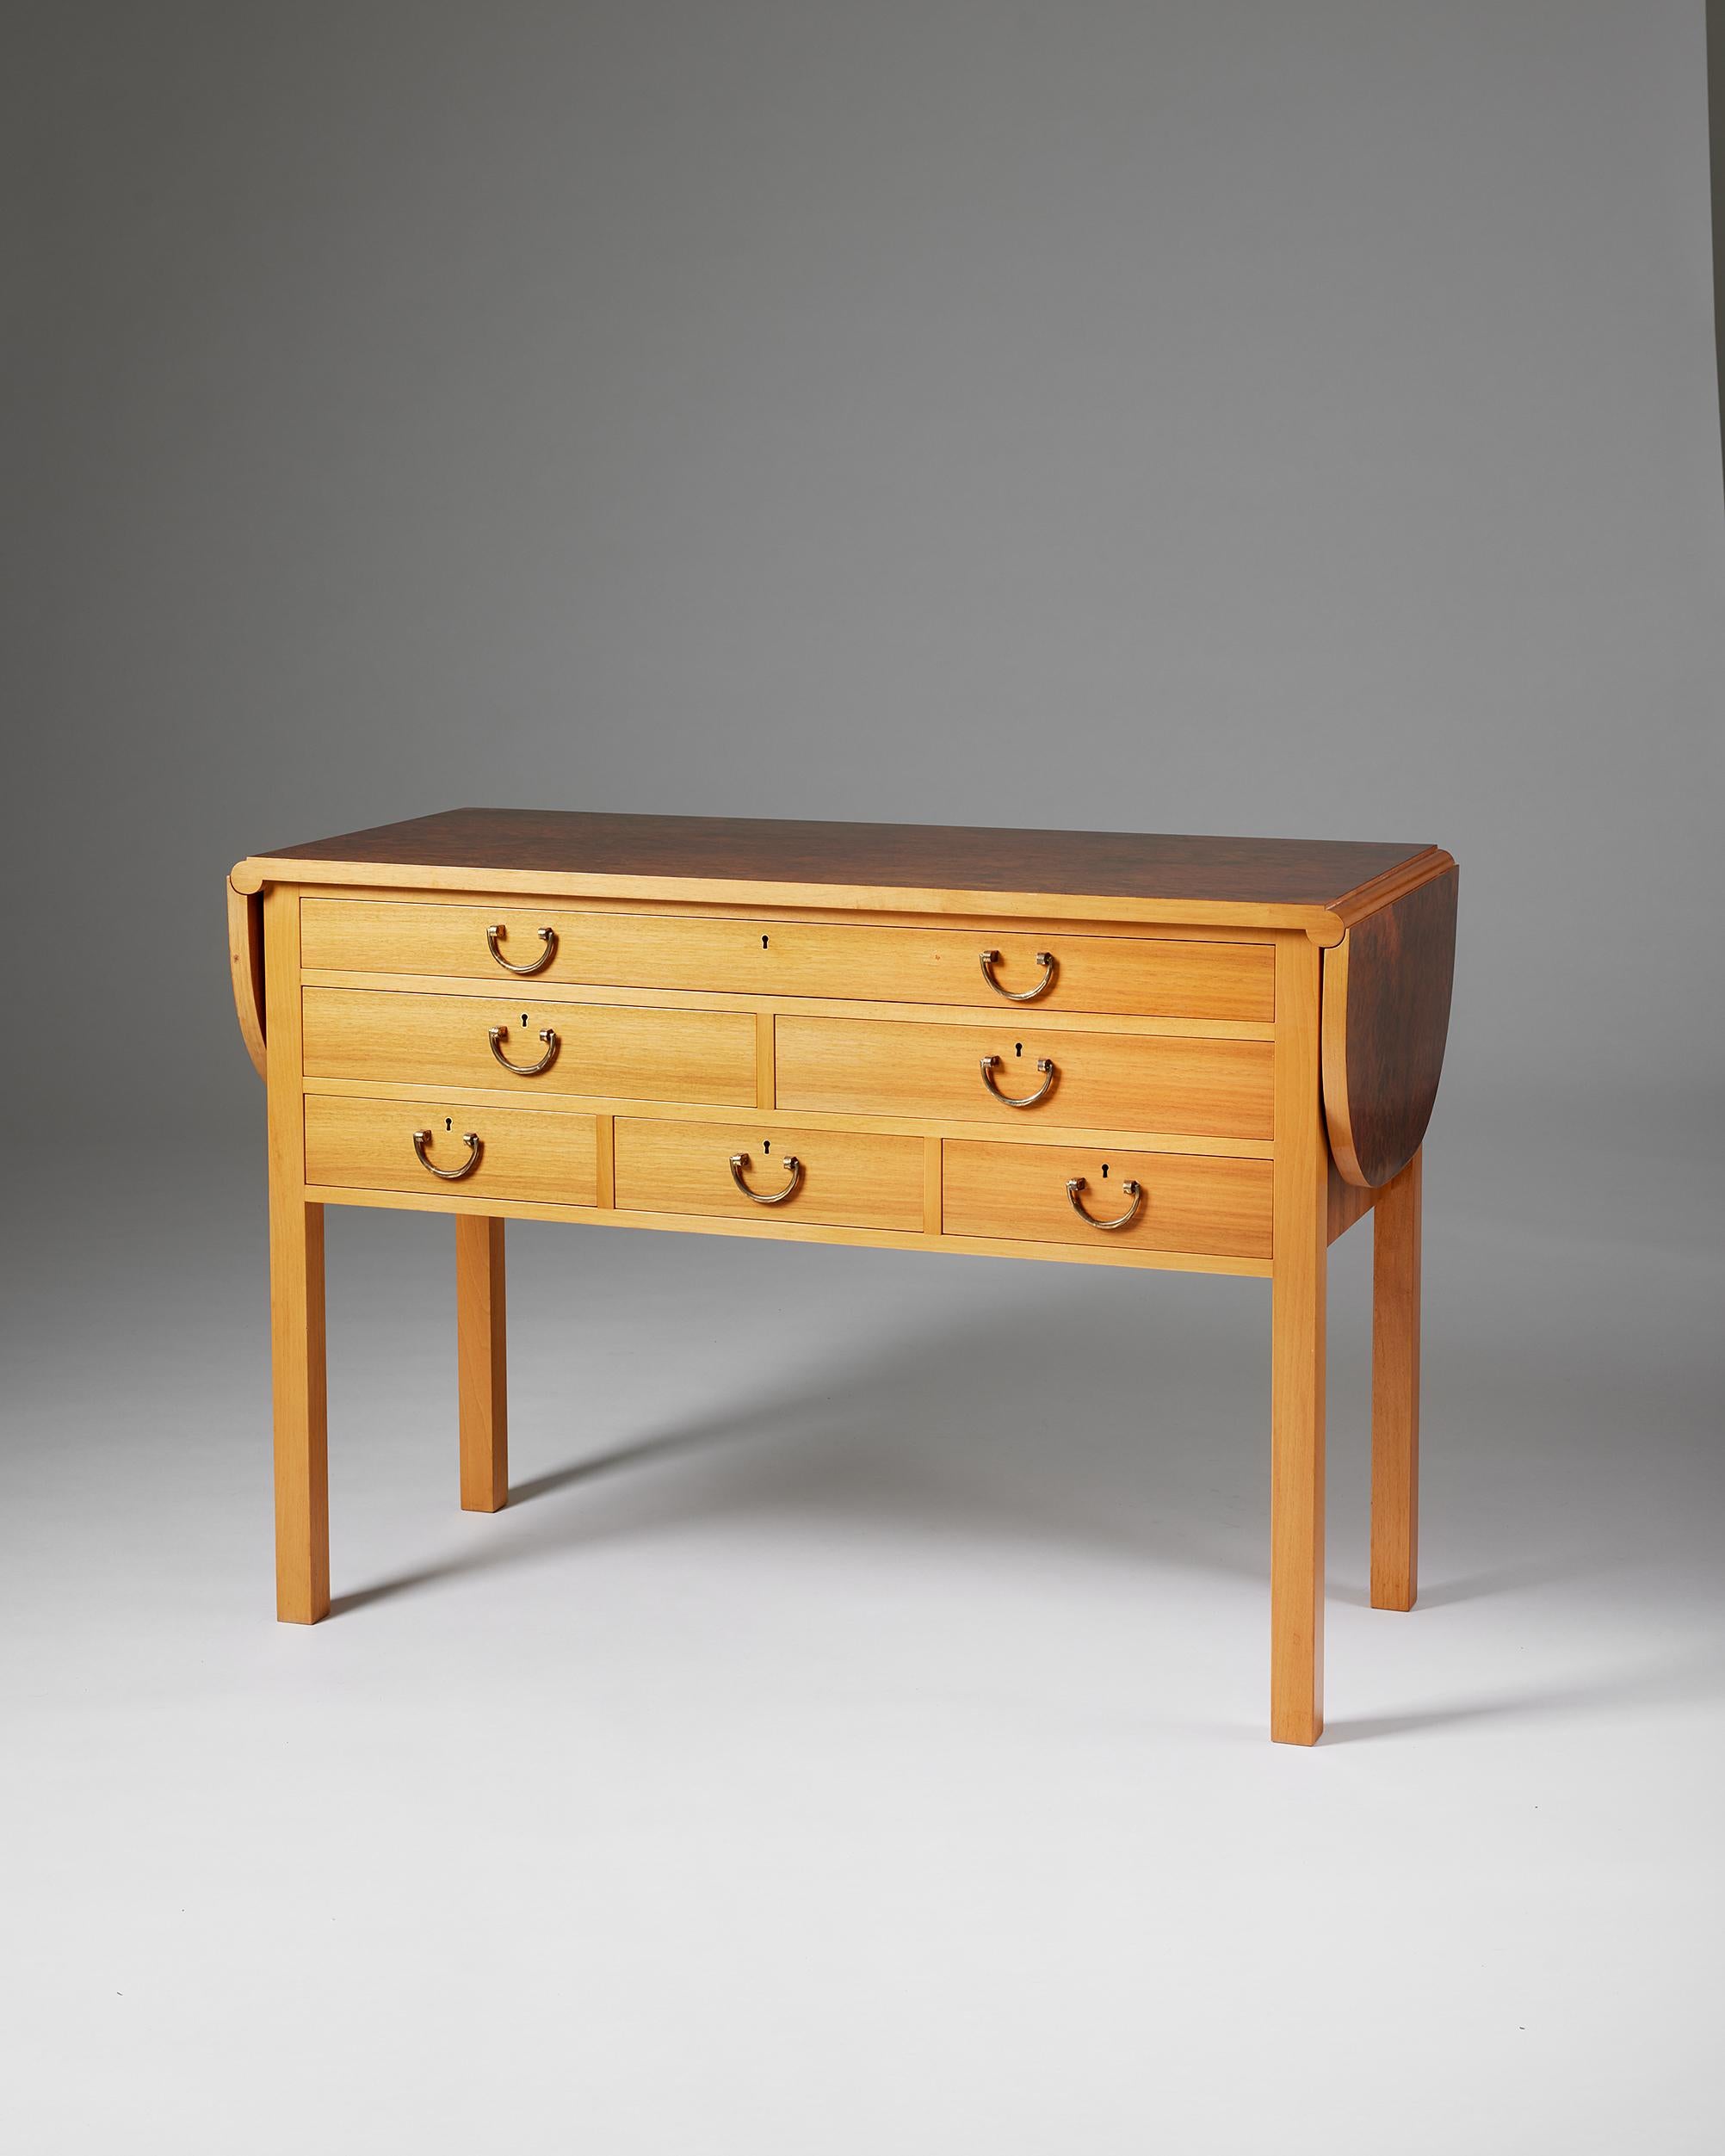 Sideboard model 1148 designed by Josef Frank for Svenskt Tenn,
Sweden, 1950s.

Walnut and alder root veneer.

This sideboard model 1148 with two clever extension flaps was designed by Josef Frank in the 1950s. Contrasting woods and a combination of